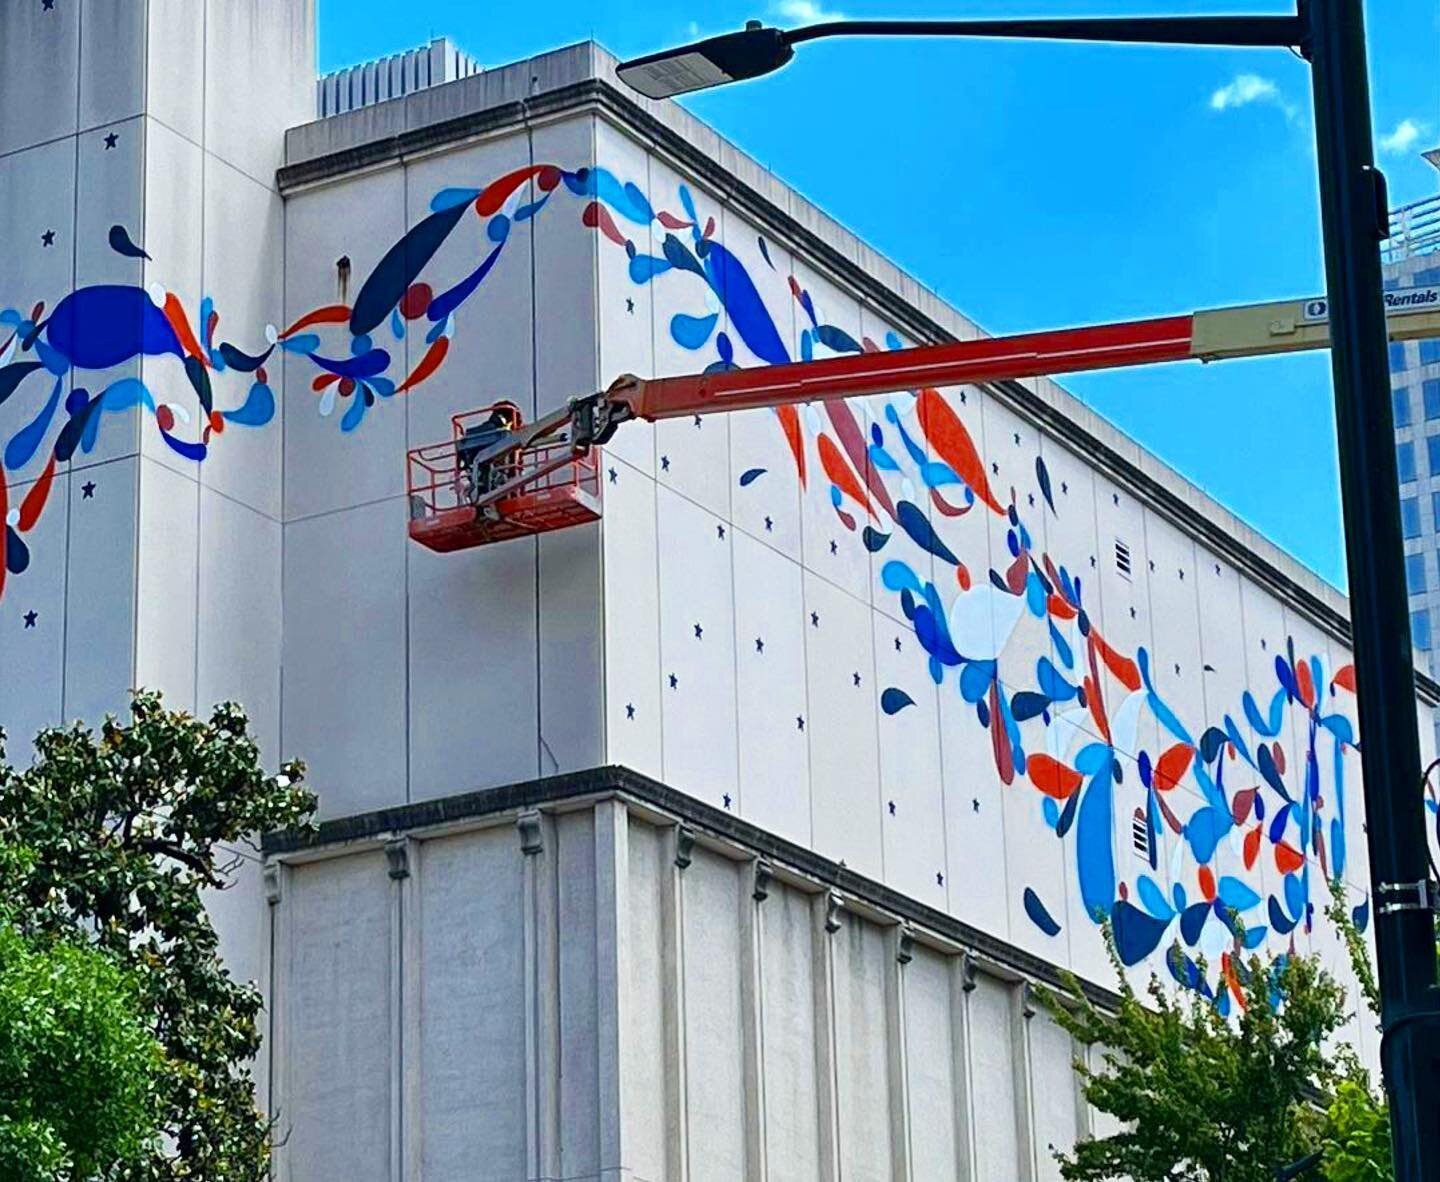 @gfb3 color bombing our city all day everyday! 🥰I love the way this project is turning out for my client. 
❤️🧡💛💚💙💜 

#Repost @midtown_atl
・・・
Midtown Artist in Residence @gfb3 is putting the finishing touches on his installation &ldquo;Follow t